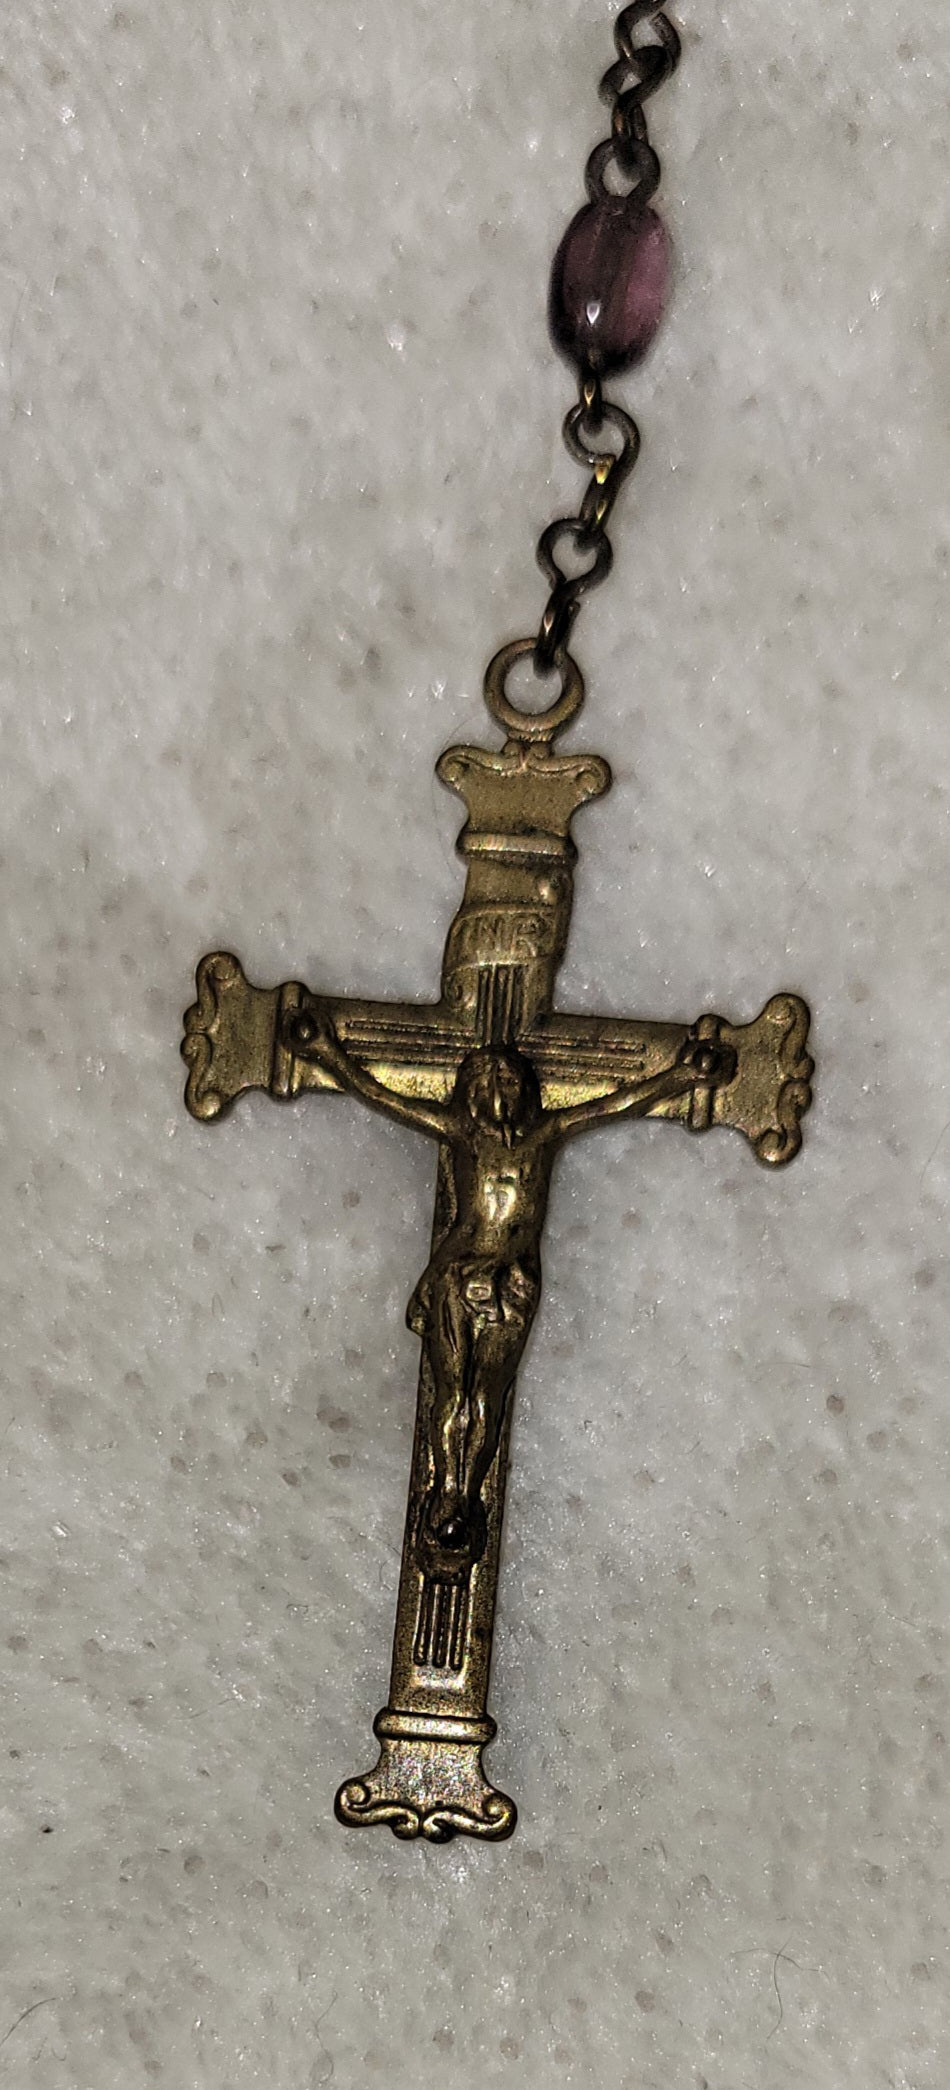 Christian Catholic rosary with crucifix and purple beads. Close-up view of crucifix.